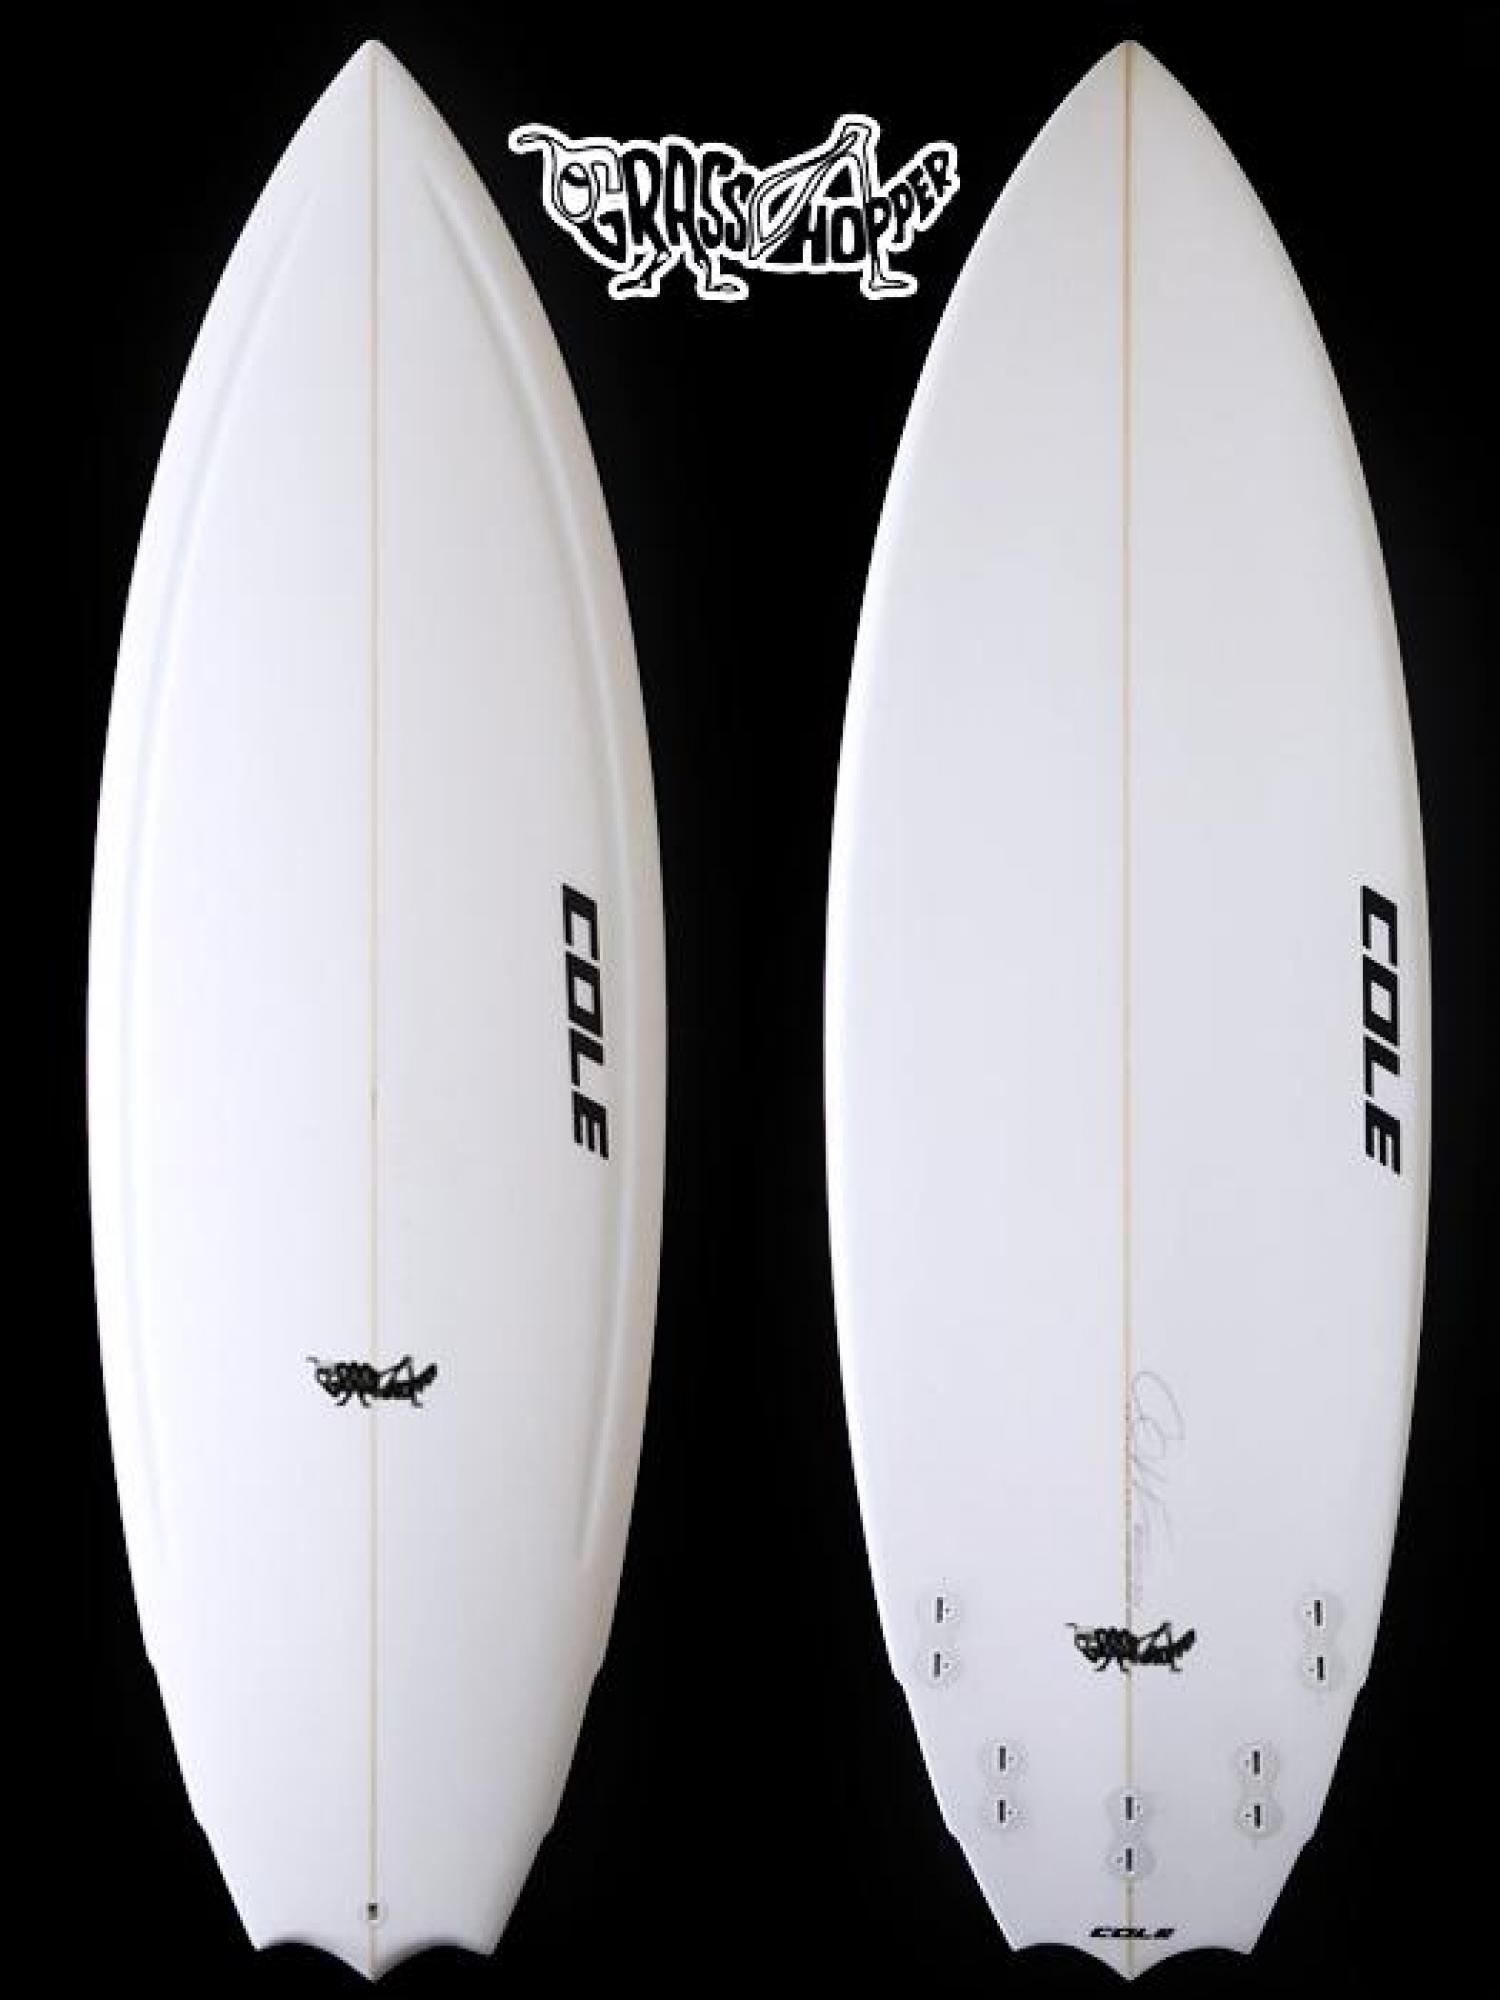 Grasshopper COLE SURFBOARDS Order accepted